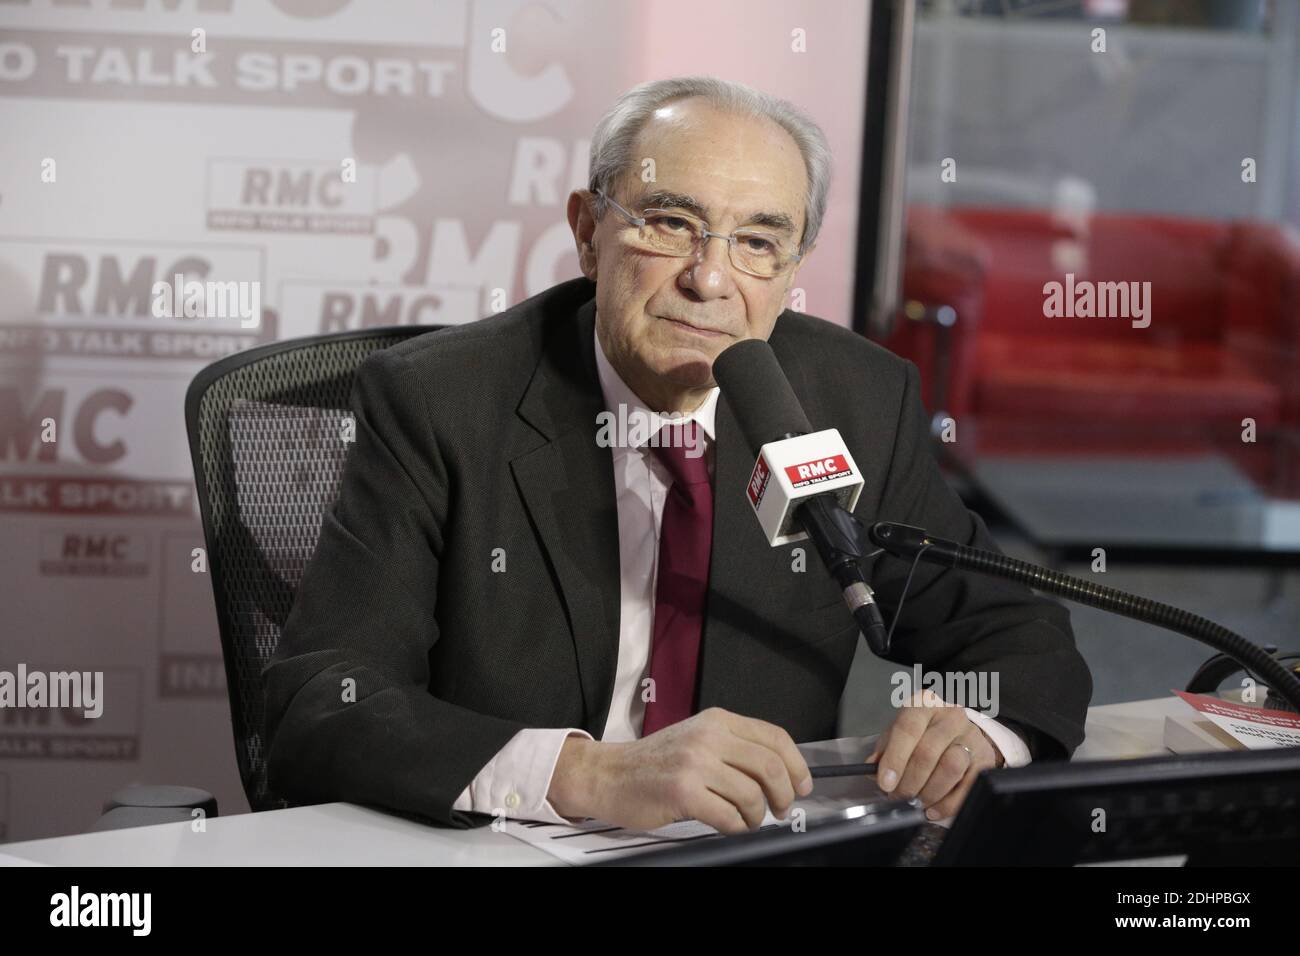 Exclusive - Bernard Debre at the 'Les Grandes Gueules' talk show on RMC  Radio, in Paris, France, on February 18, 2016. Photo by Jerome  Domine/ABACAPRESS.COM Stock Photo - Alamy